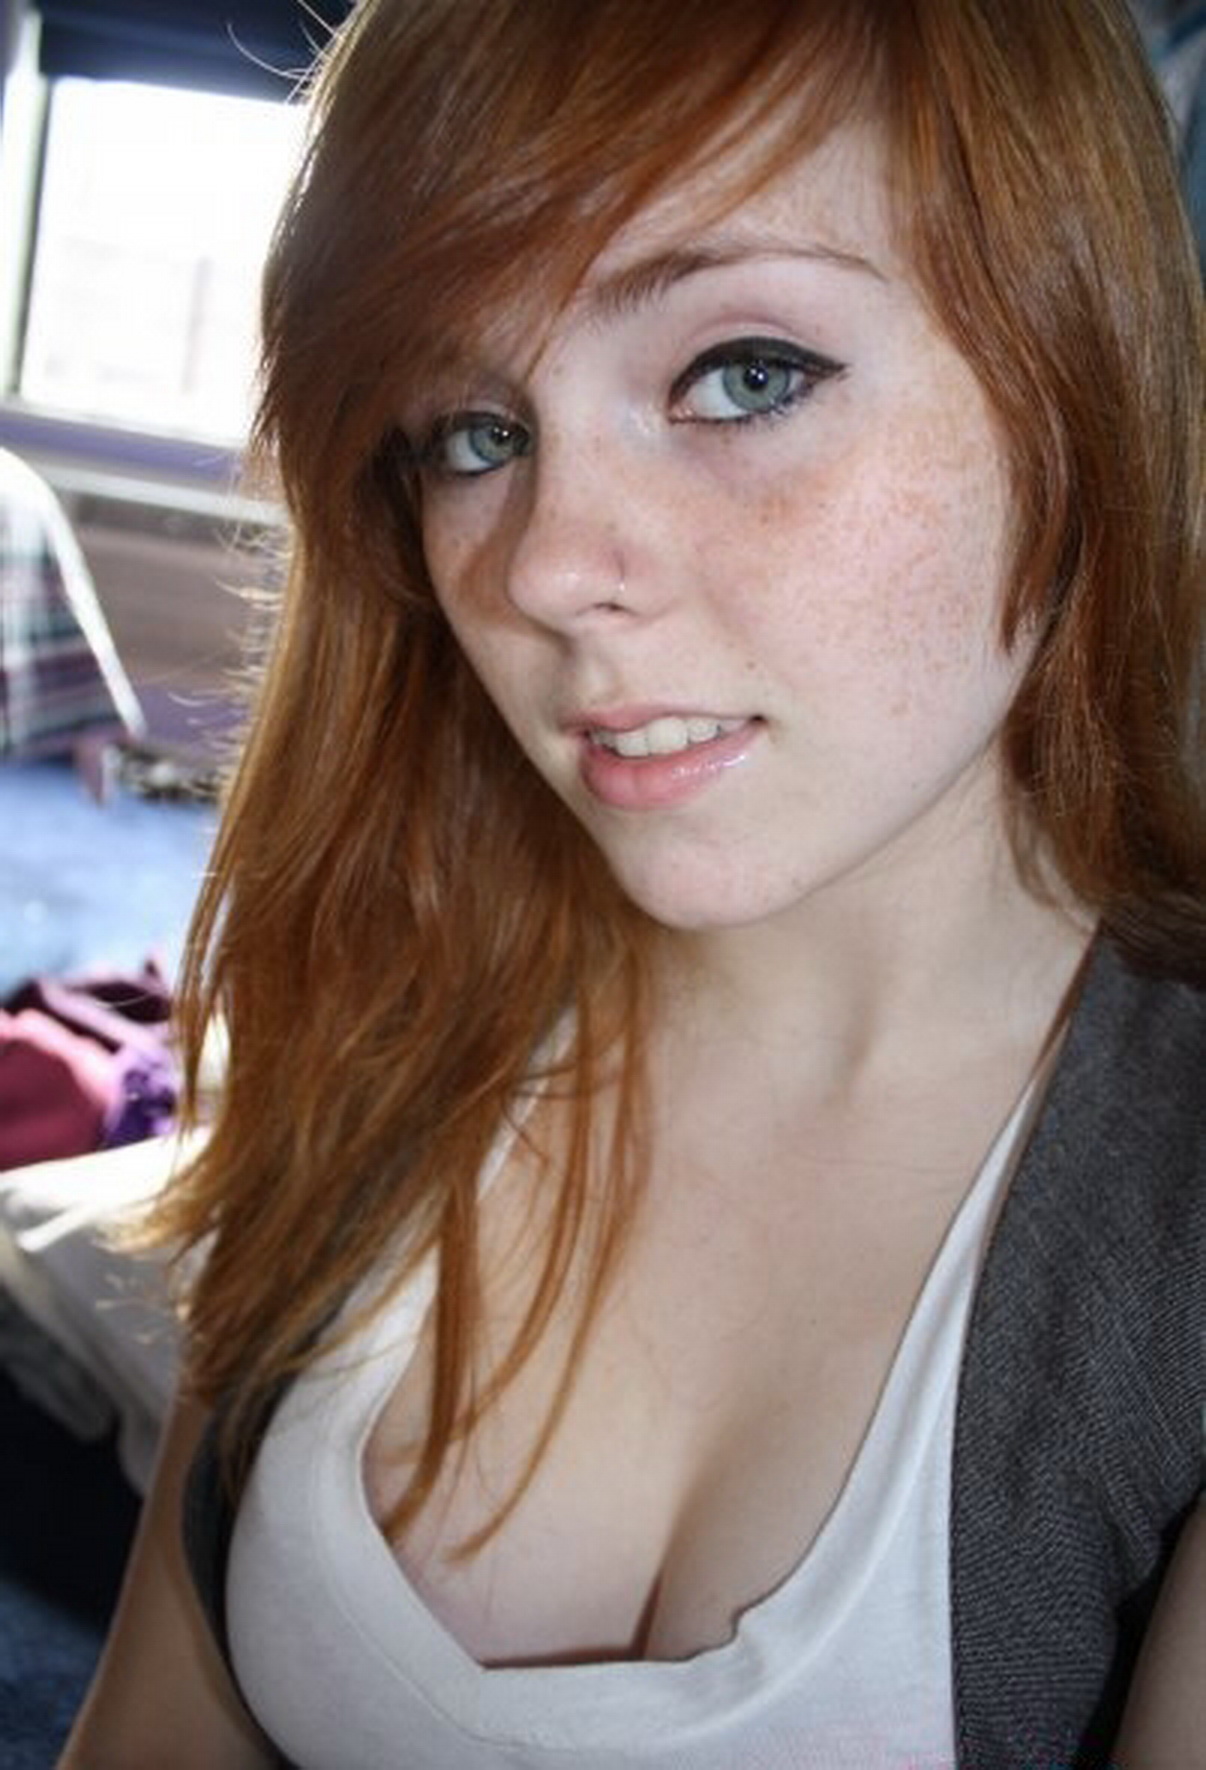 College Redhead Freckles Porn - Redhead; freckles and cleavage Porn Pic - EPORNER